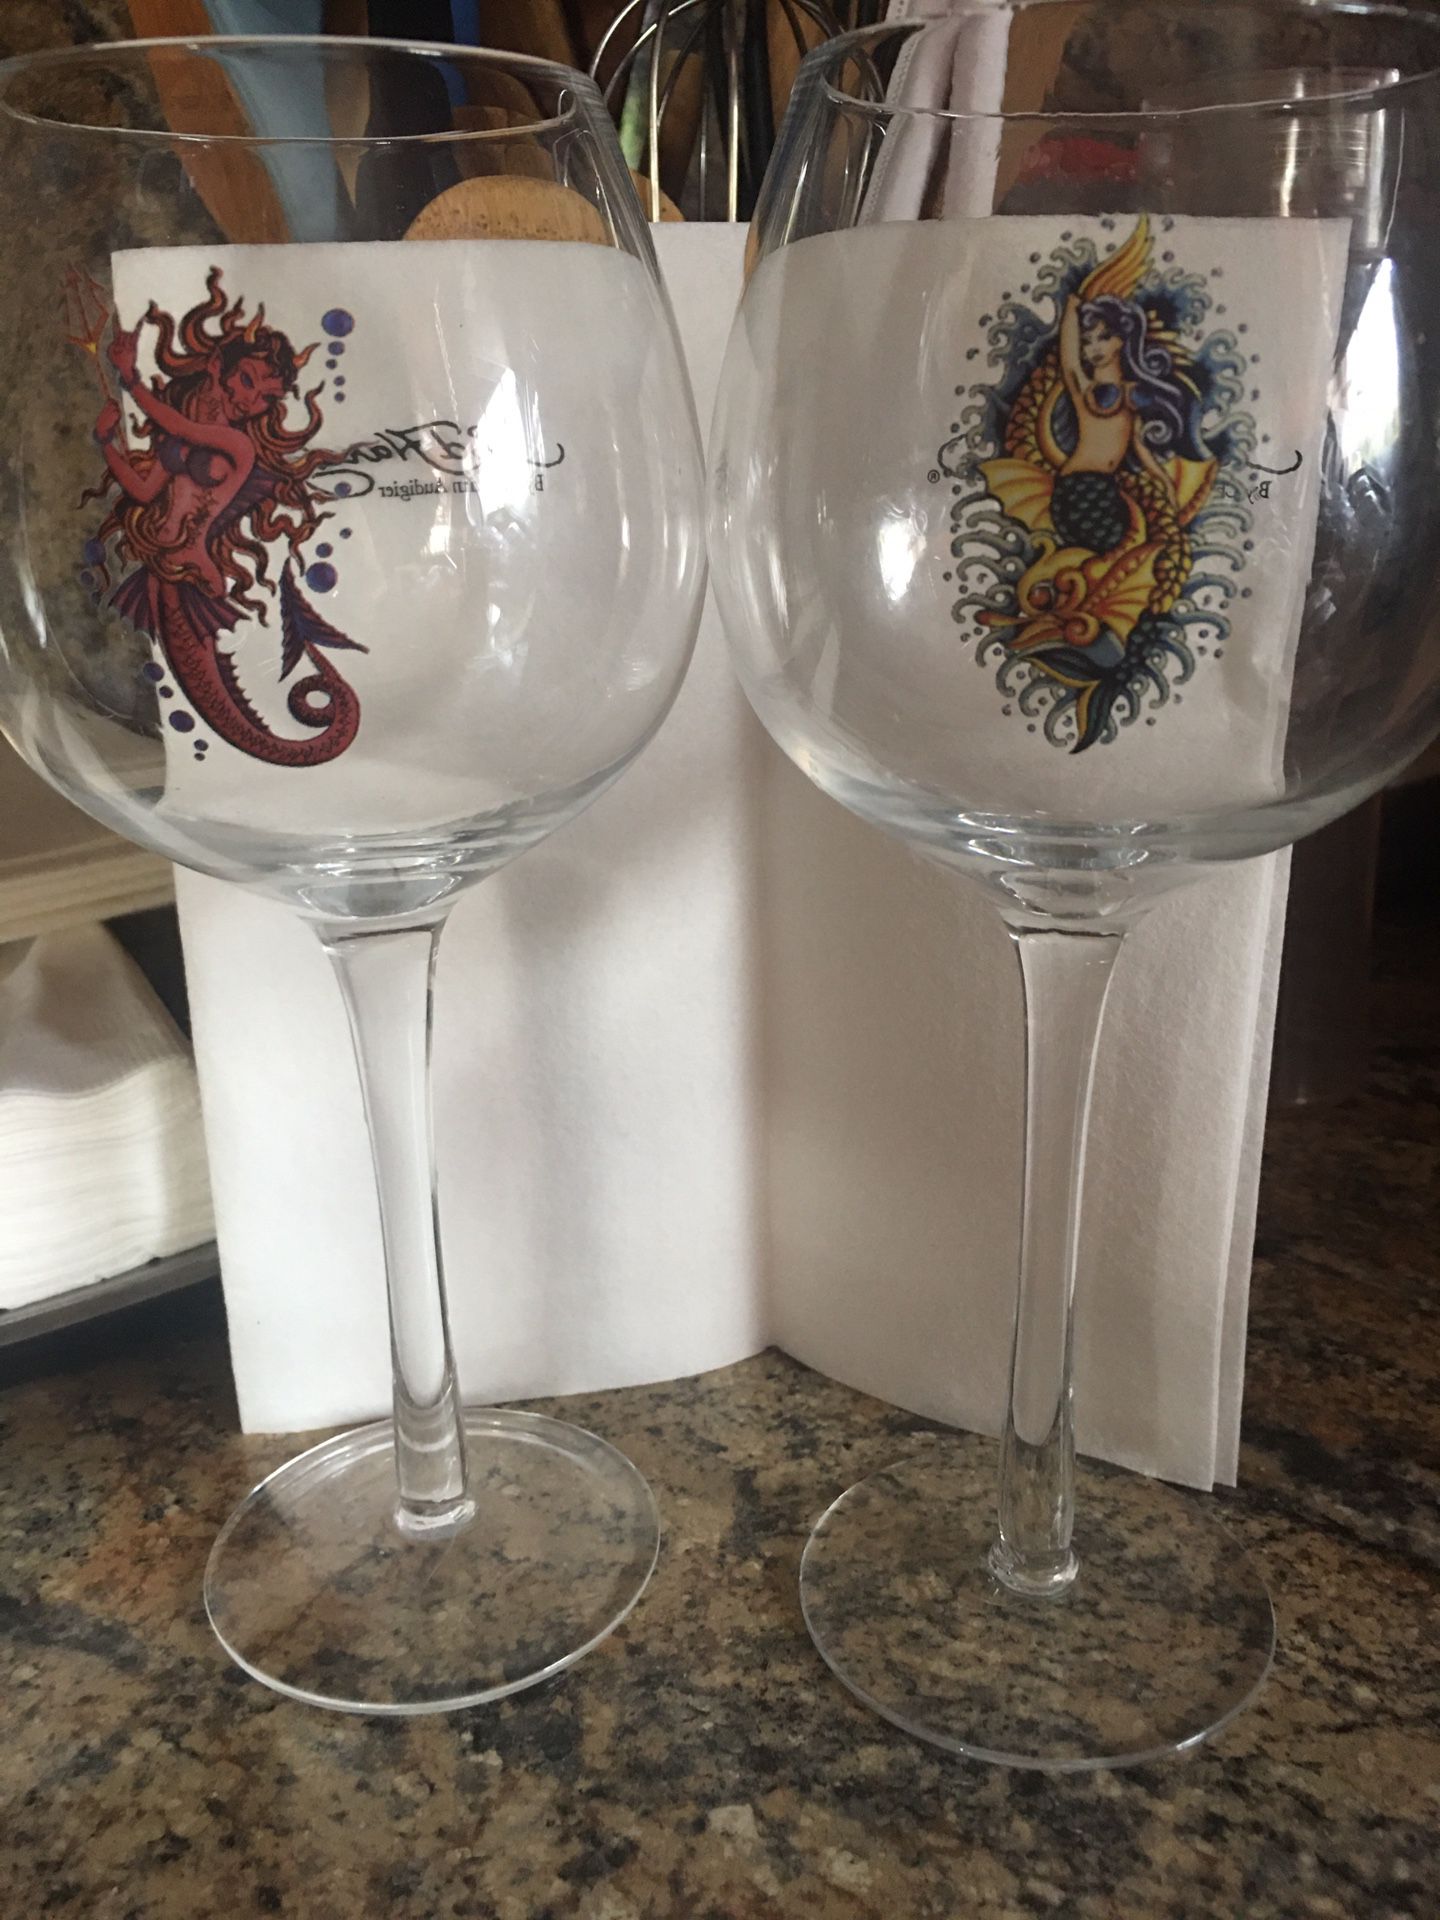 2 Collectible Ed Hardy by Christian Audigier glasses for wine